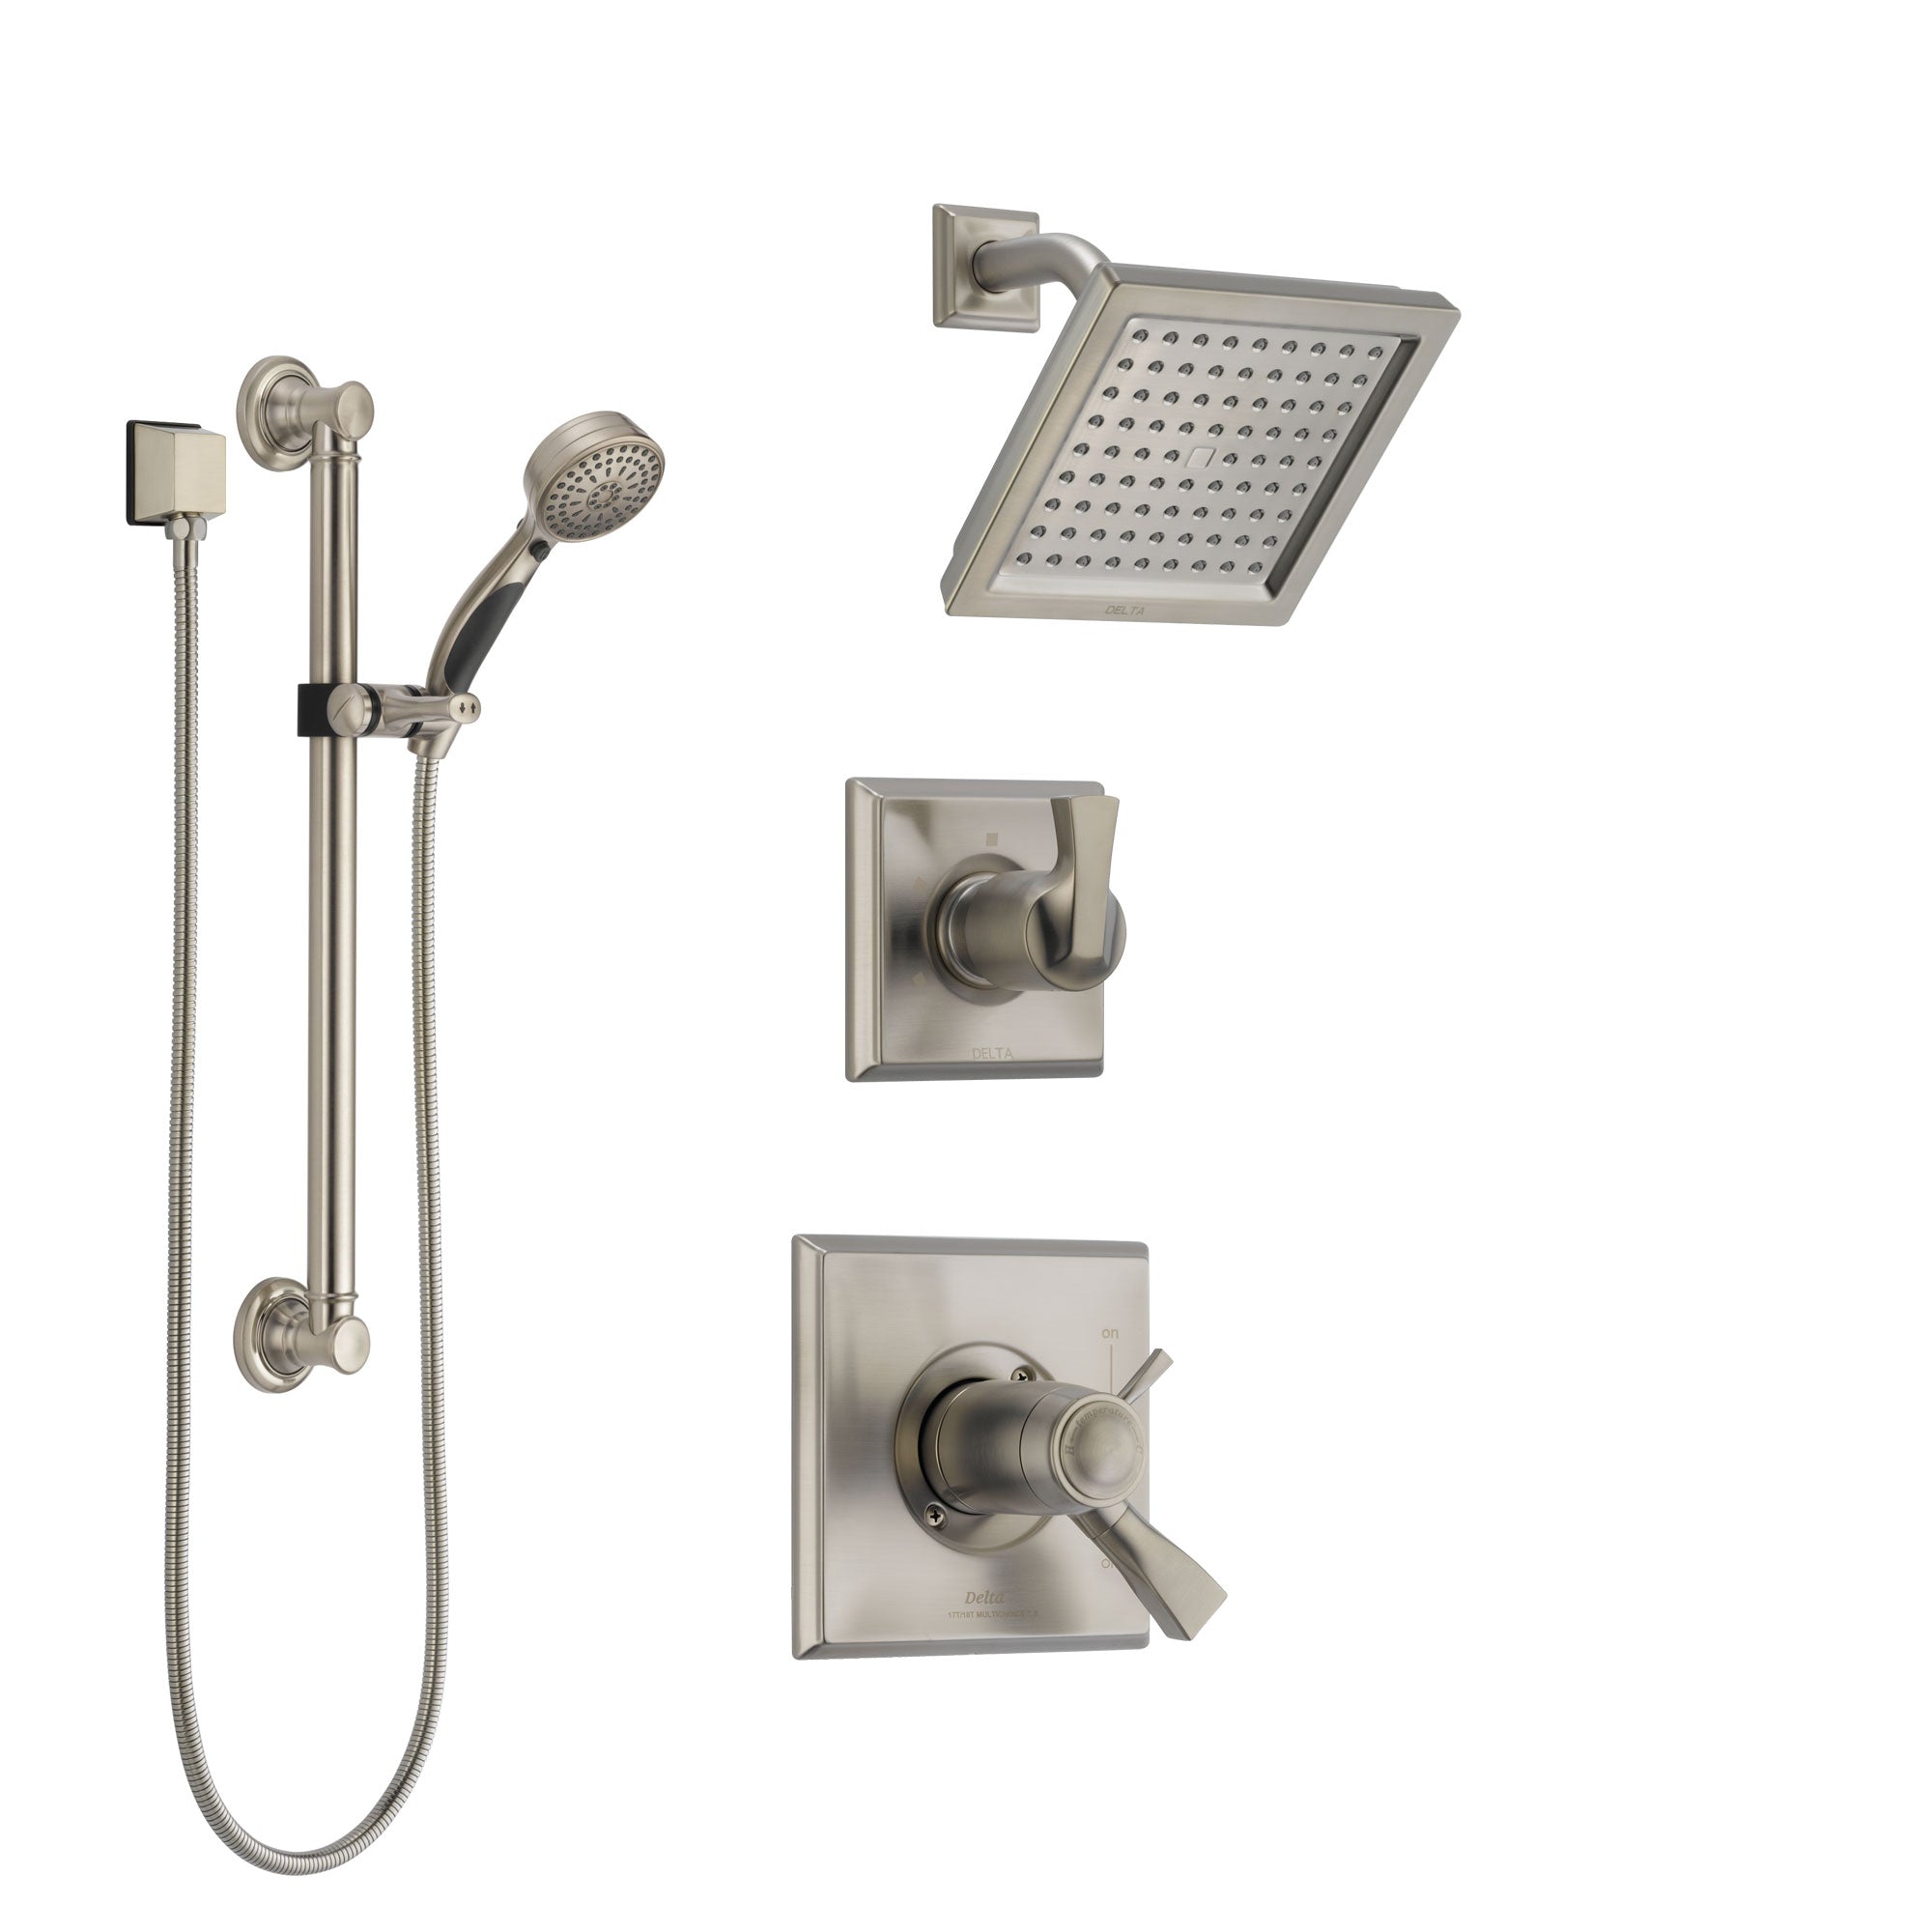 Delta Dryden Dual Thermostatic Control Handle Stainless Steel Finish Shower System, Diverter, Showerhead, and Hand Shower with Grab Bar SS17T2511SS3